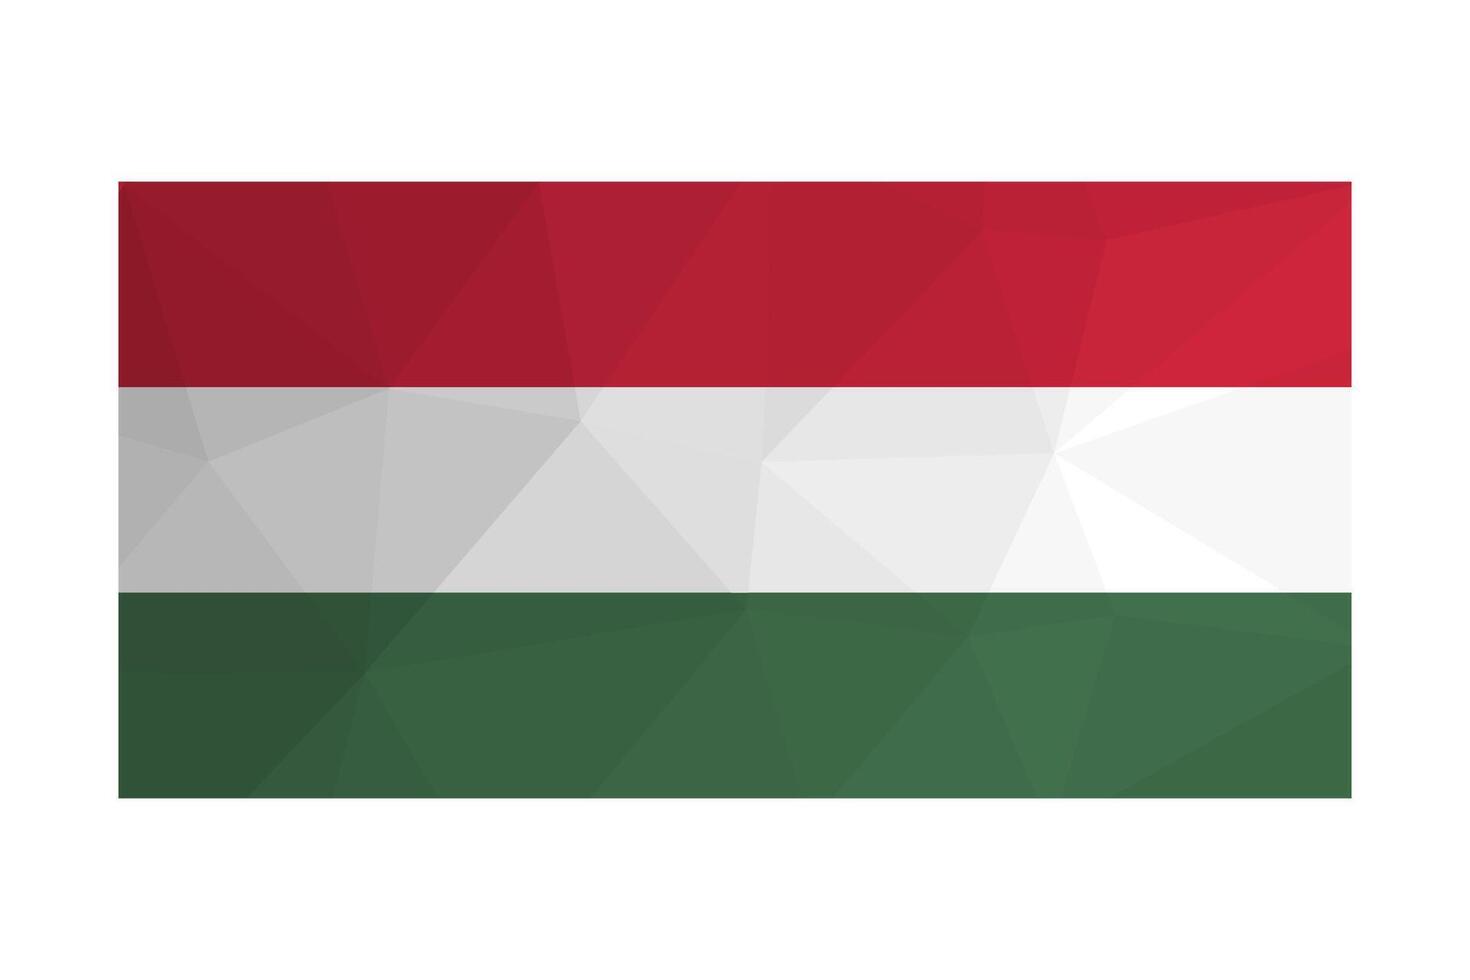 Vector isolated illustration. National Hungarian flag with tricolour of red, white and green. Official symbol of Hungary. Creative design in low poly style with triangular shapes.